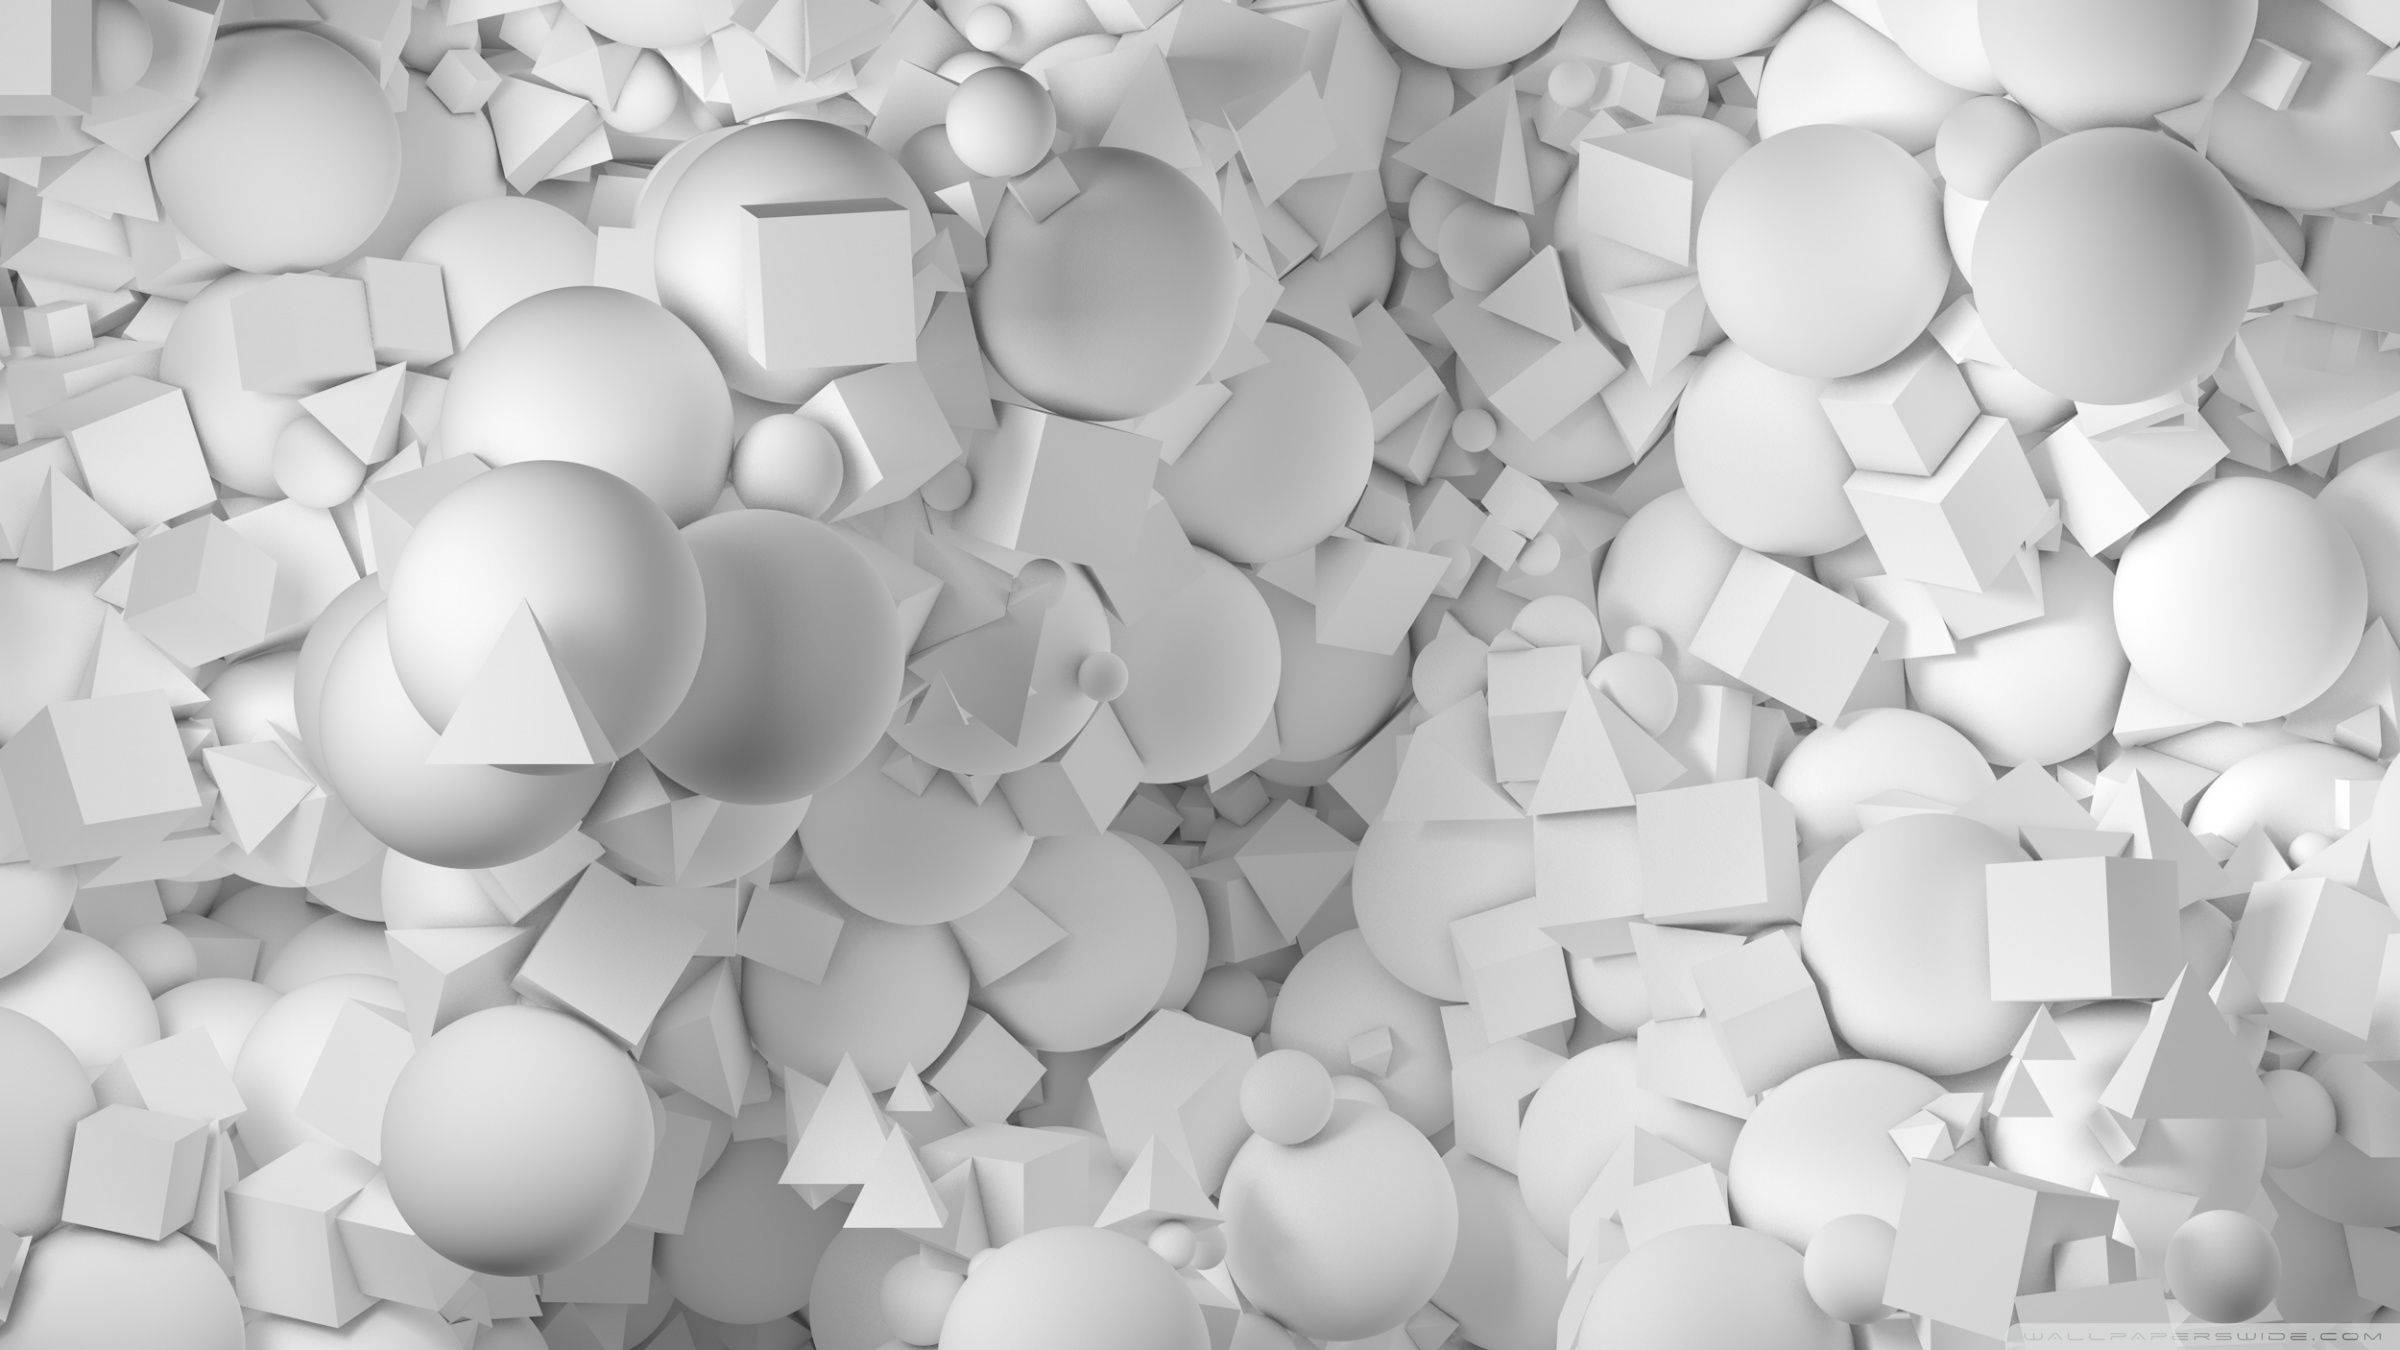 White Pile Of Shapes 3d Android Phone Wallpaper